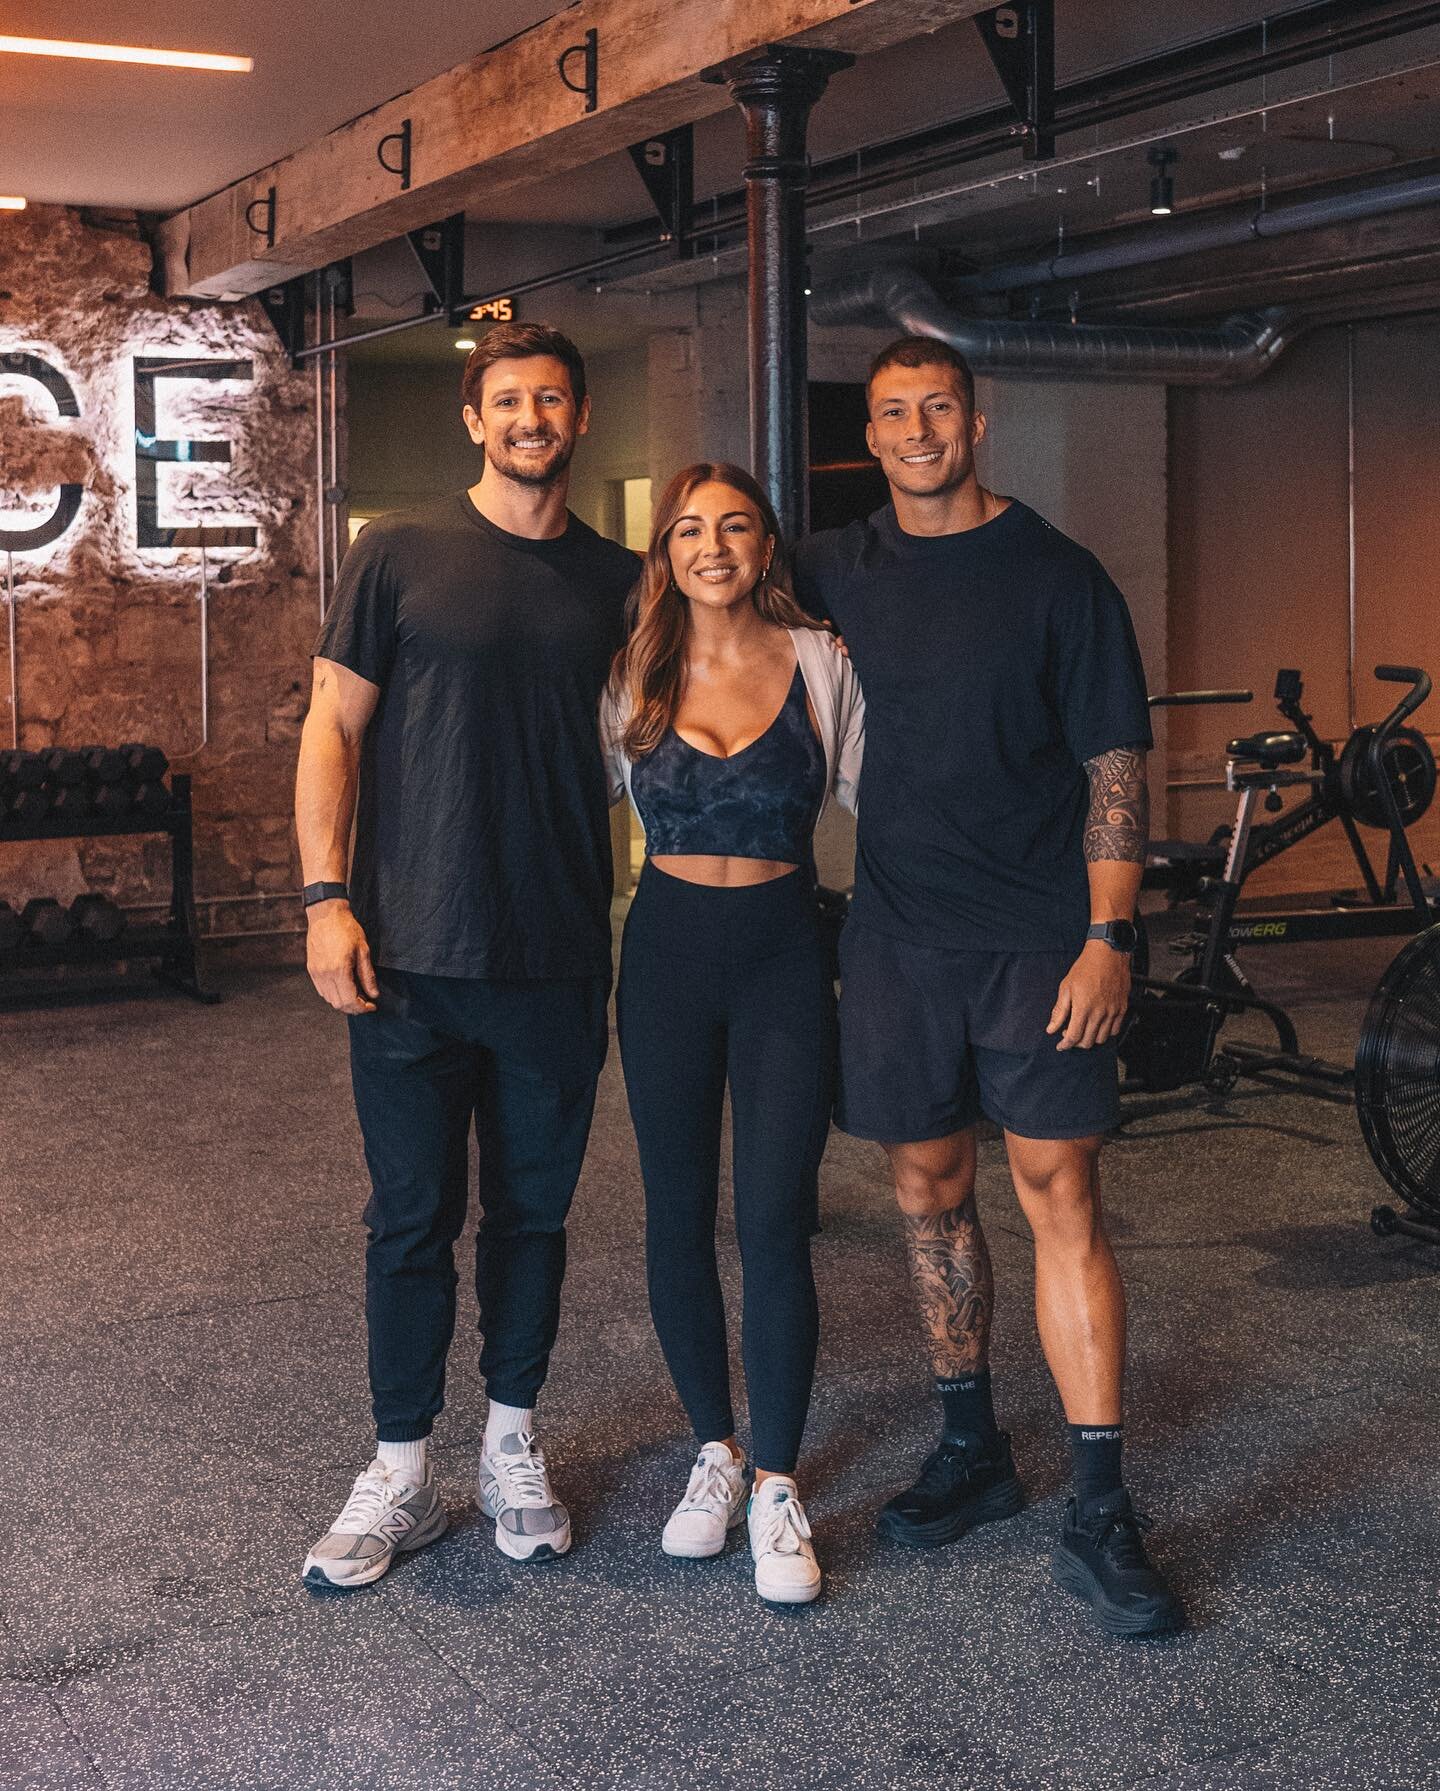 Our head of programming @jack_coachedbyjack is back in SPACE this week coaching your Friday AM classes. 💪 

If you&rsquo;re not booked in already this is your sign to do so and if you don&rsquo;t have a membership grab an intro bundle via the app. L